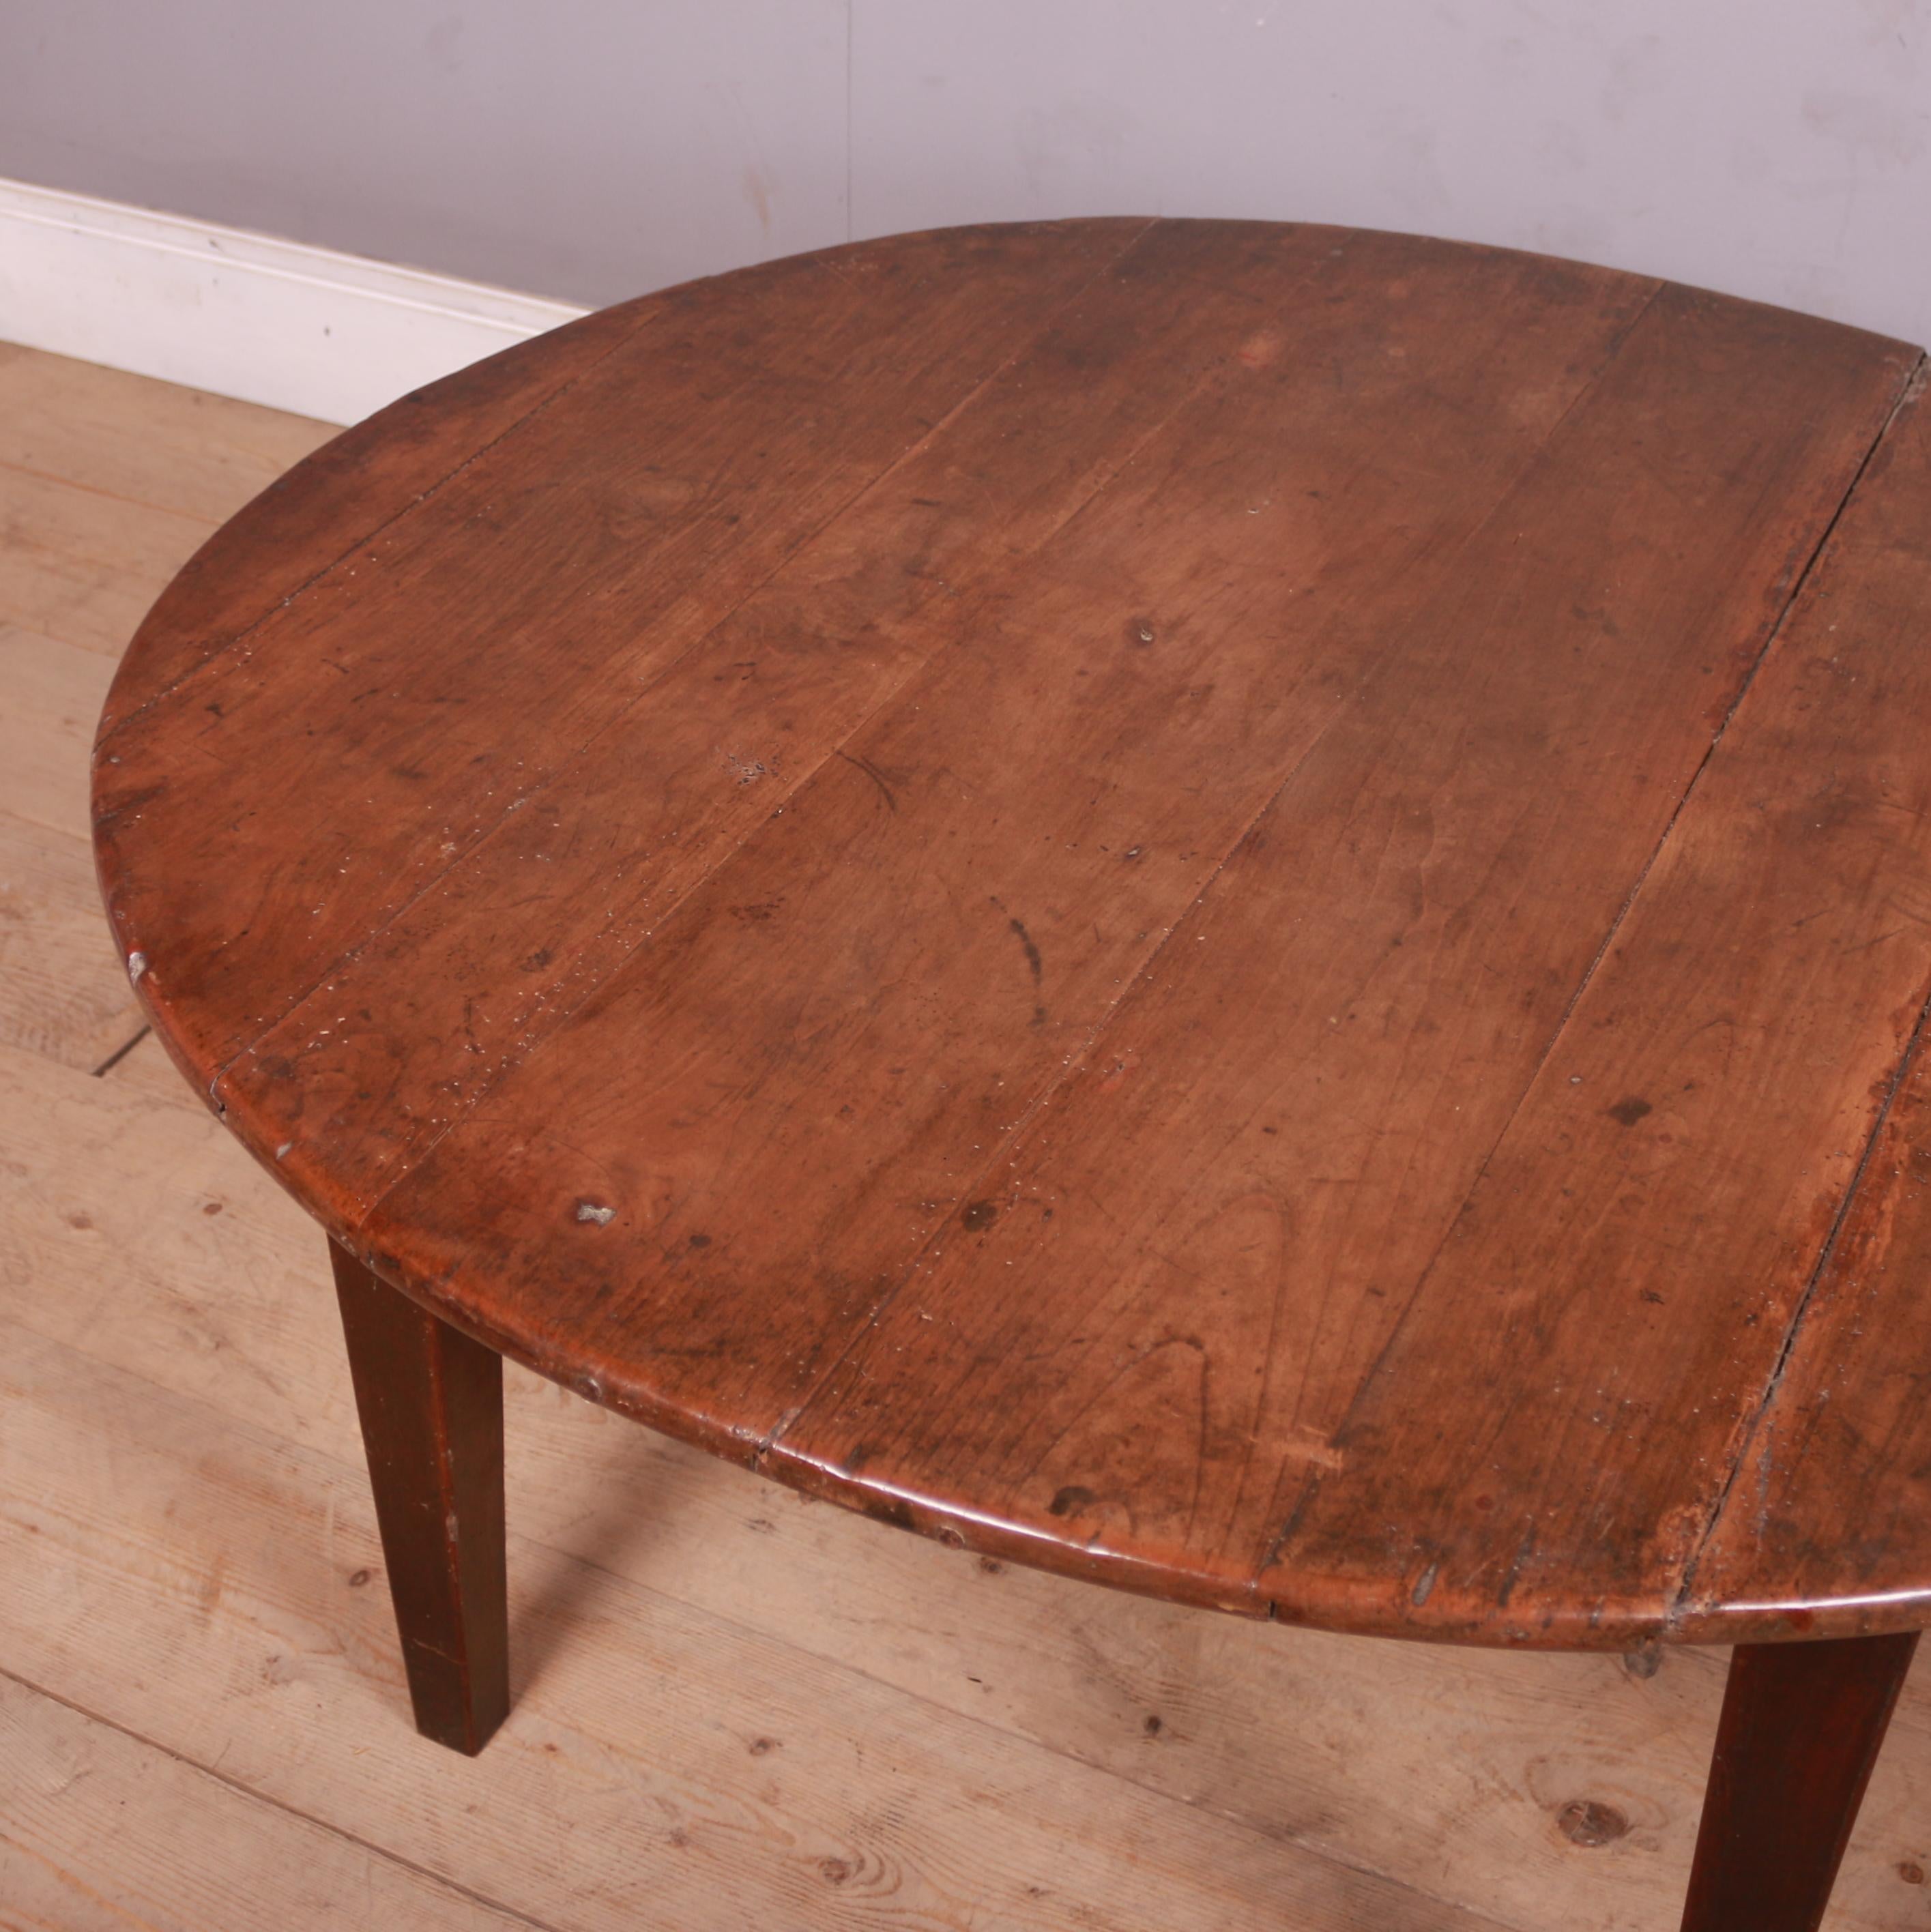 19th C French round chestnut and oak coffee table. 1860



Dimensions
45.5 inches (116 cms) Wide
43 inches (109 cms) Deep
22.5 inches (57 cms) High.